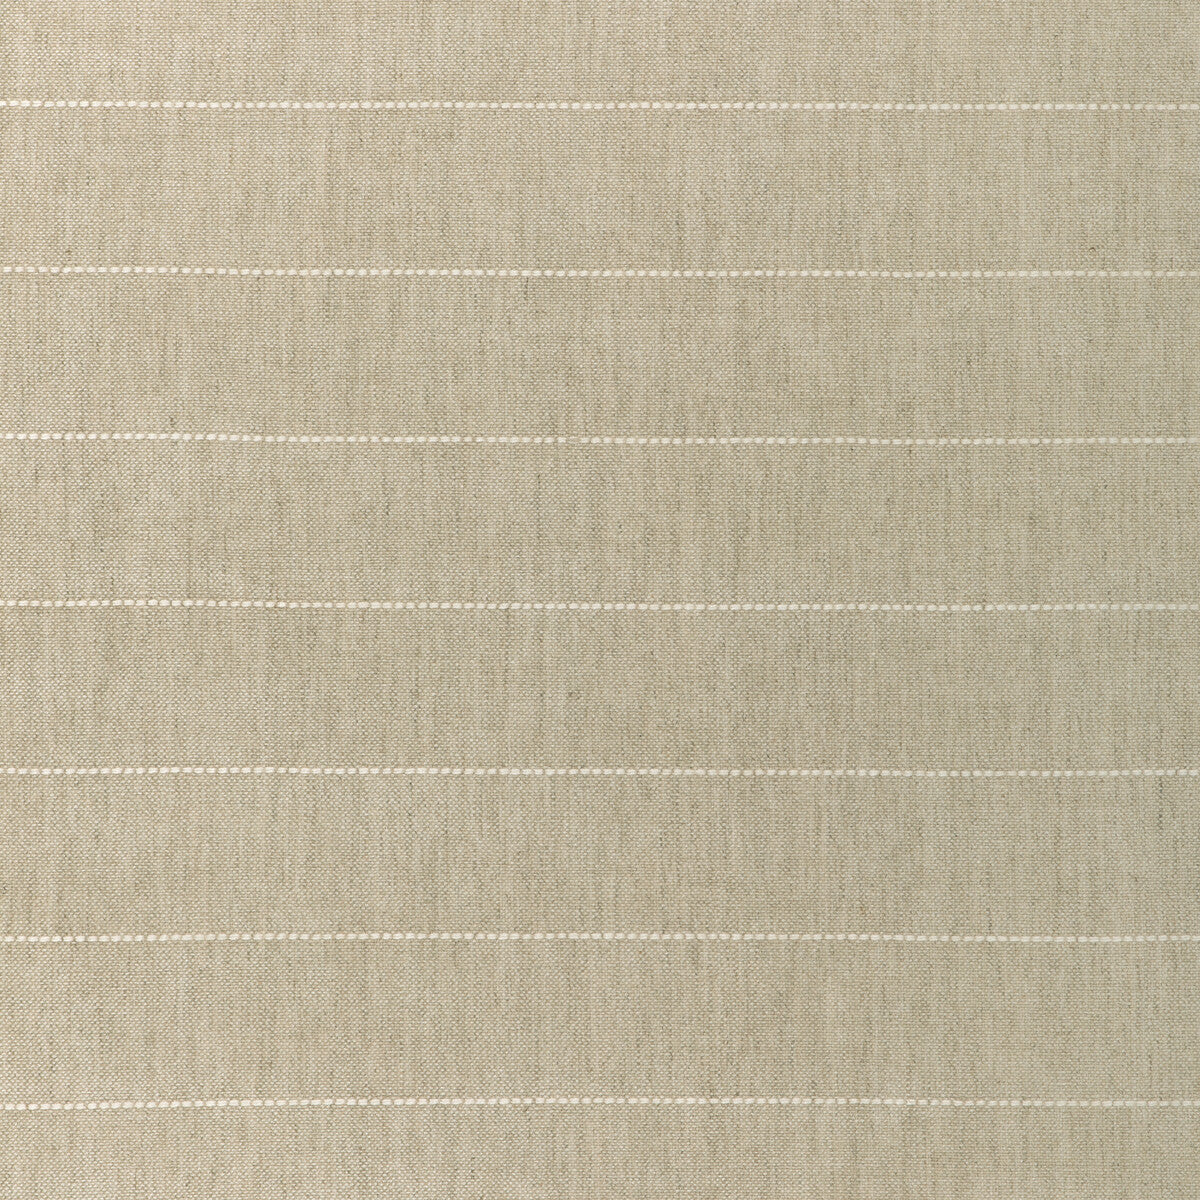 Barley Stripe fabric in flax color - pattern 36901.16.0 - by Kravet Couture in the Atelier Weaves collection